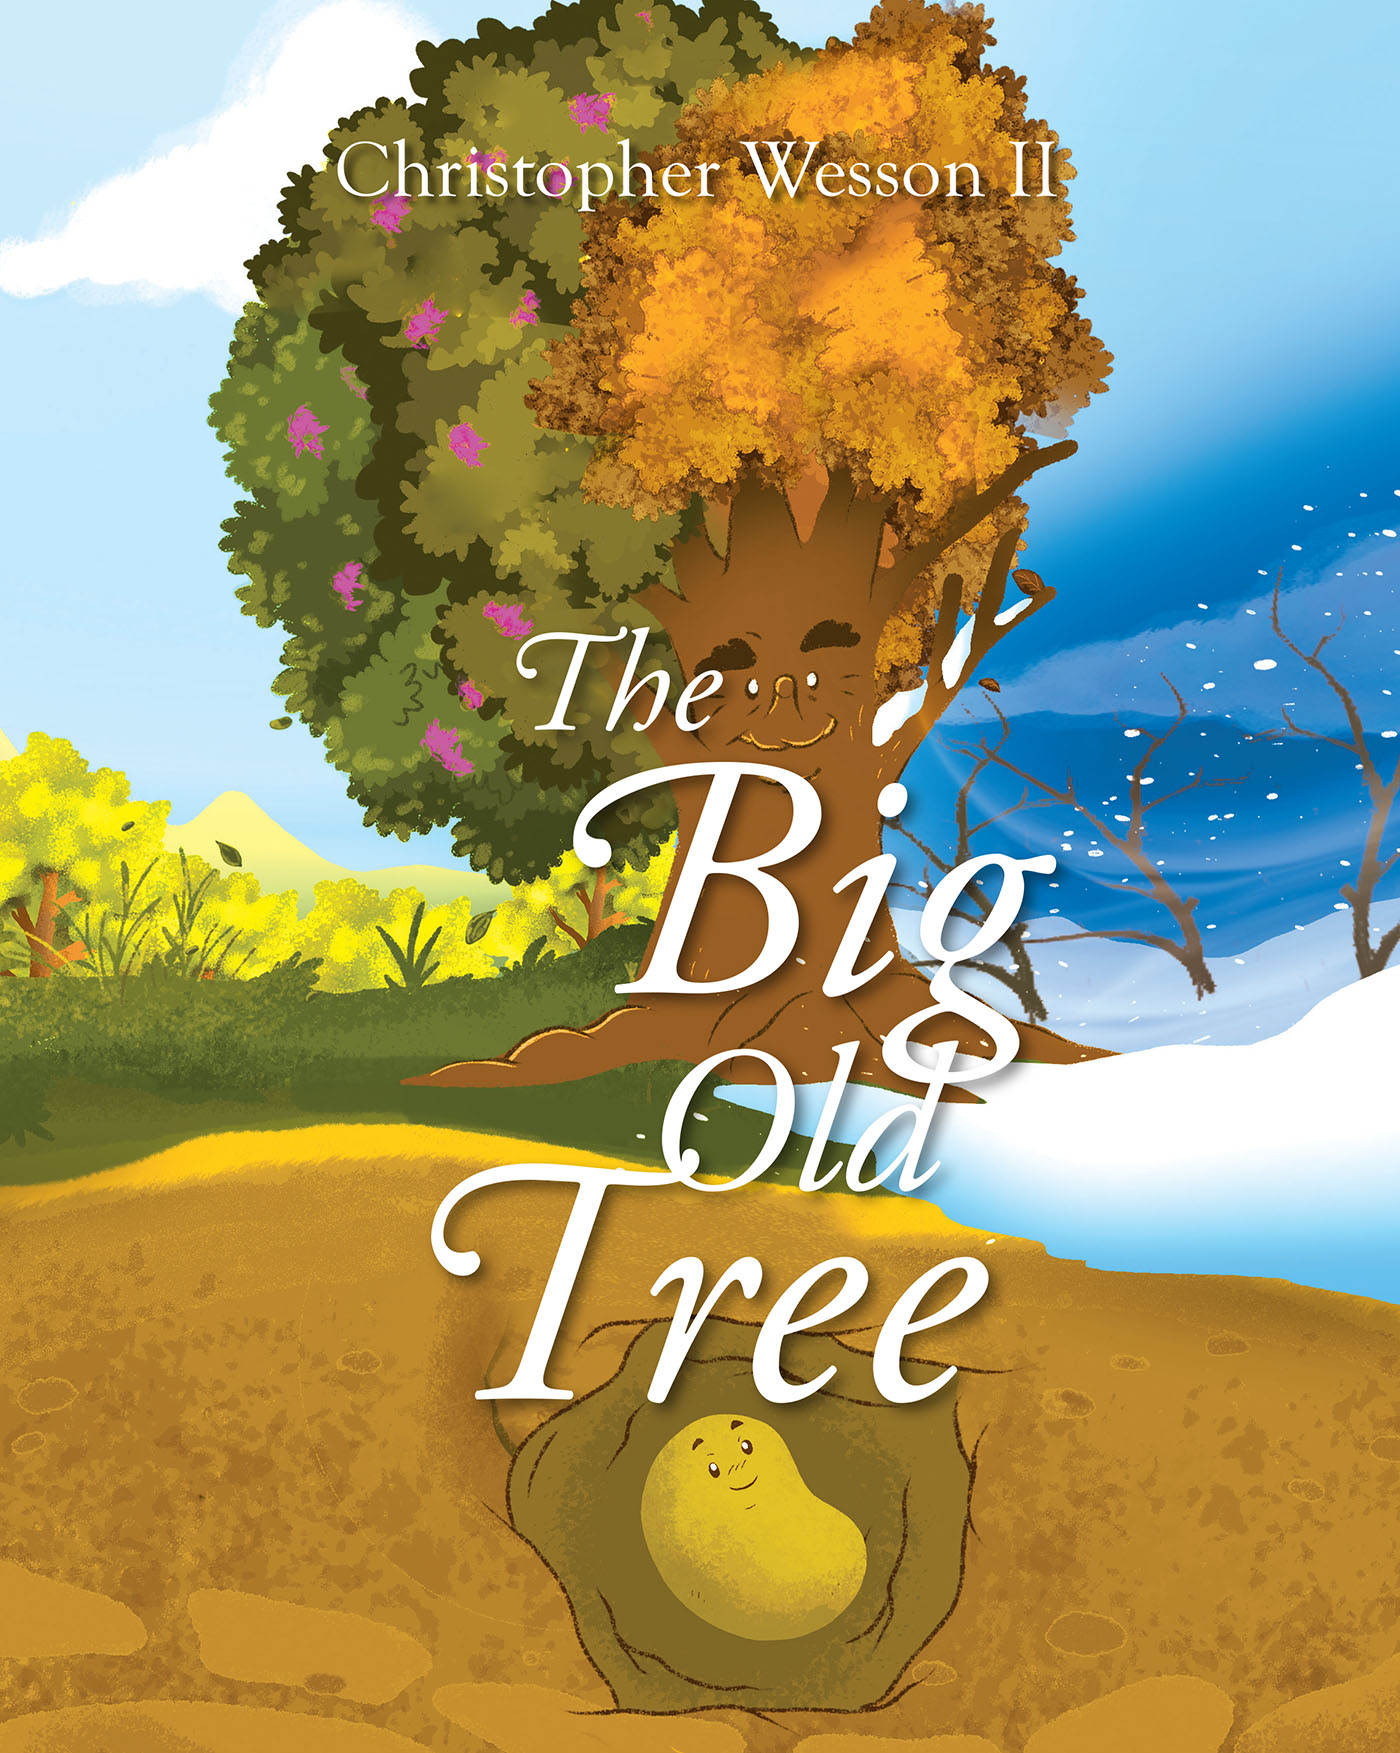 Author Christopher Wesson II’s New Book, "The Big Old Tree," is an Enchanting Children’s Story That Offers Valuable Life Lessons Told by the Big Old Tree